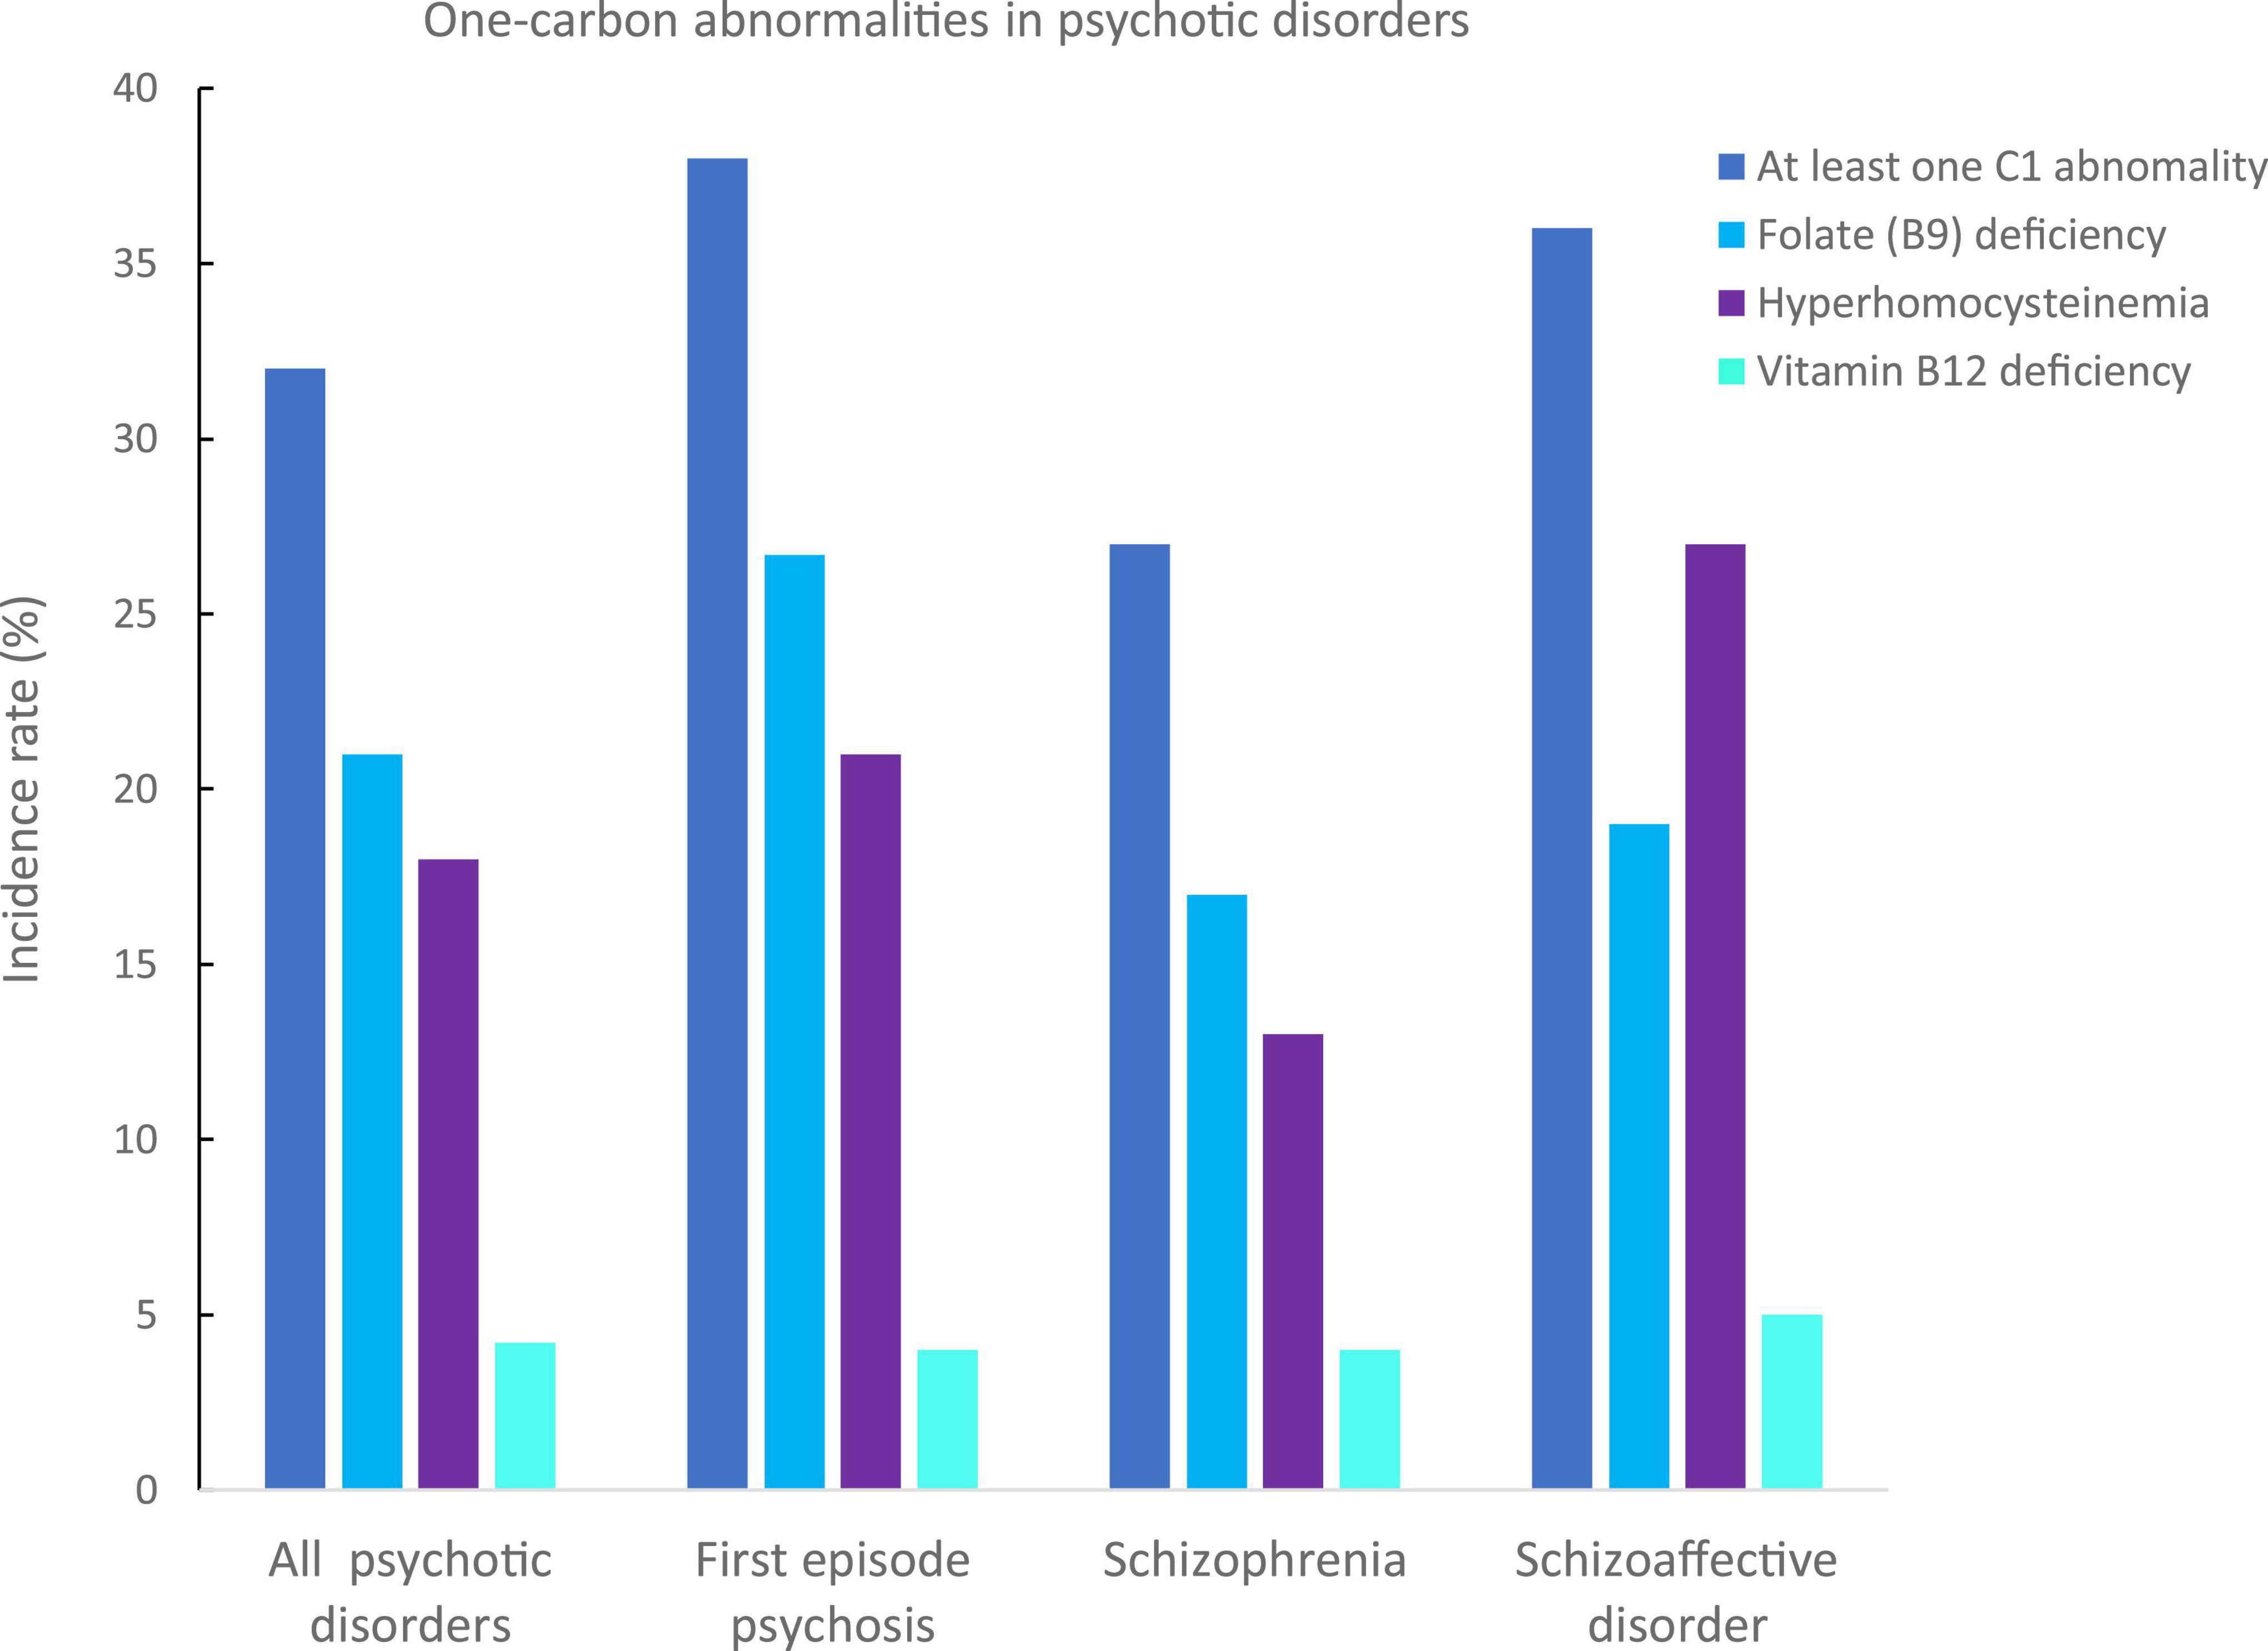 Abnormalities in one-carbon metabolism in young patients with psychosis